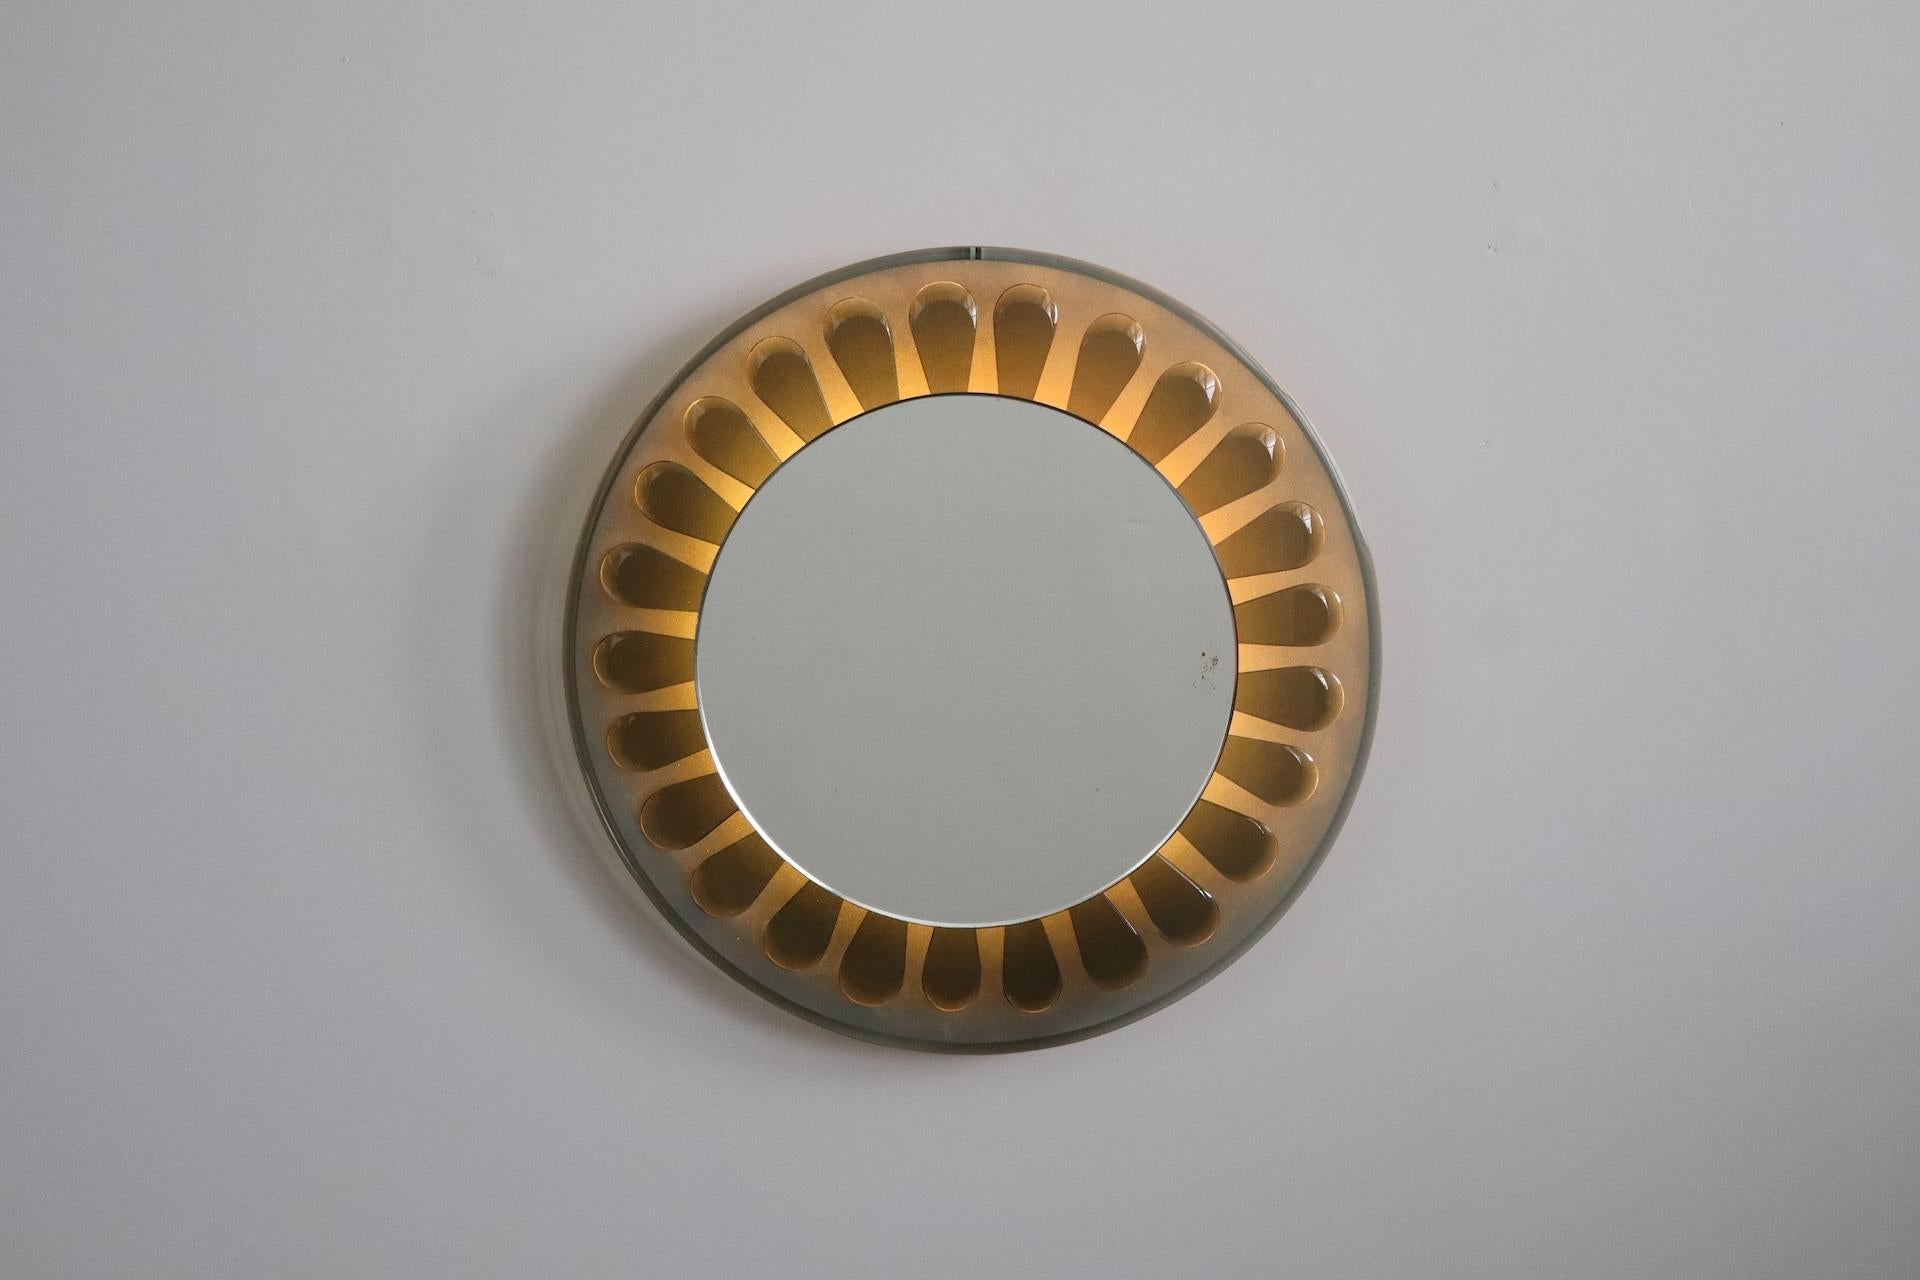 Mid-Century Modern Flower-shaped wall mirror by Max Ingrand for Fontana Arte Italia 1964 For Sale